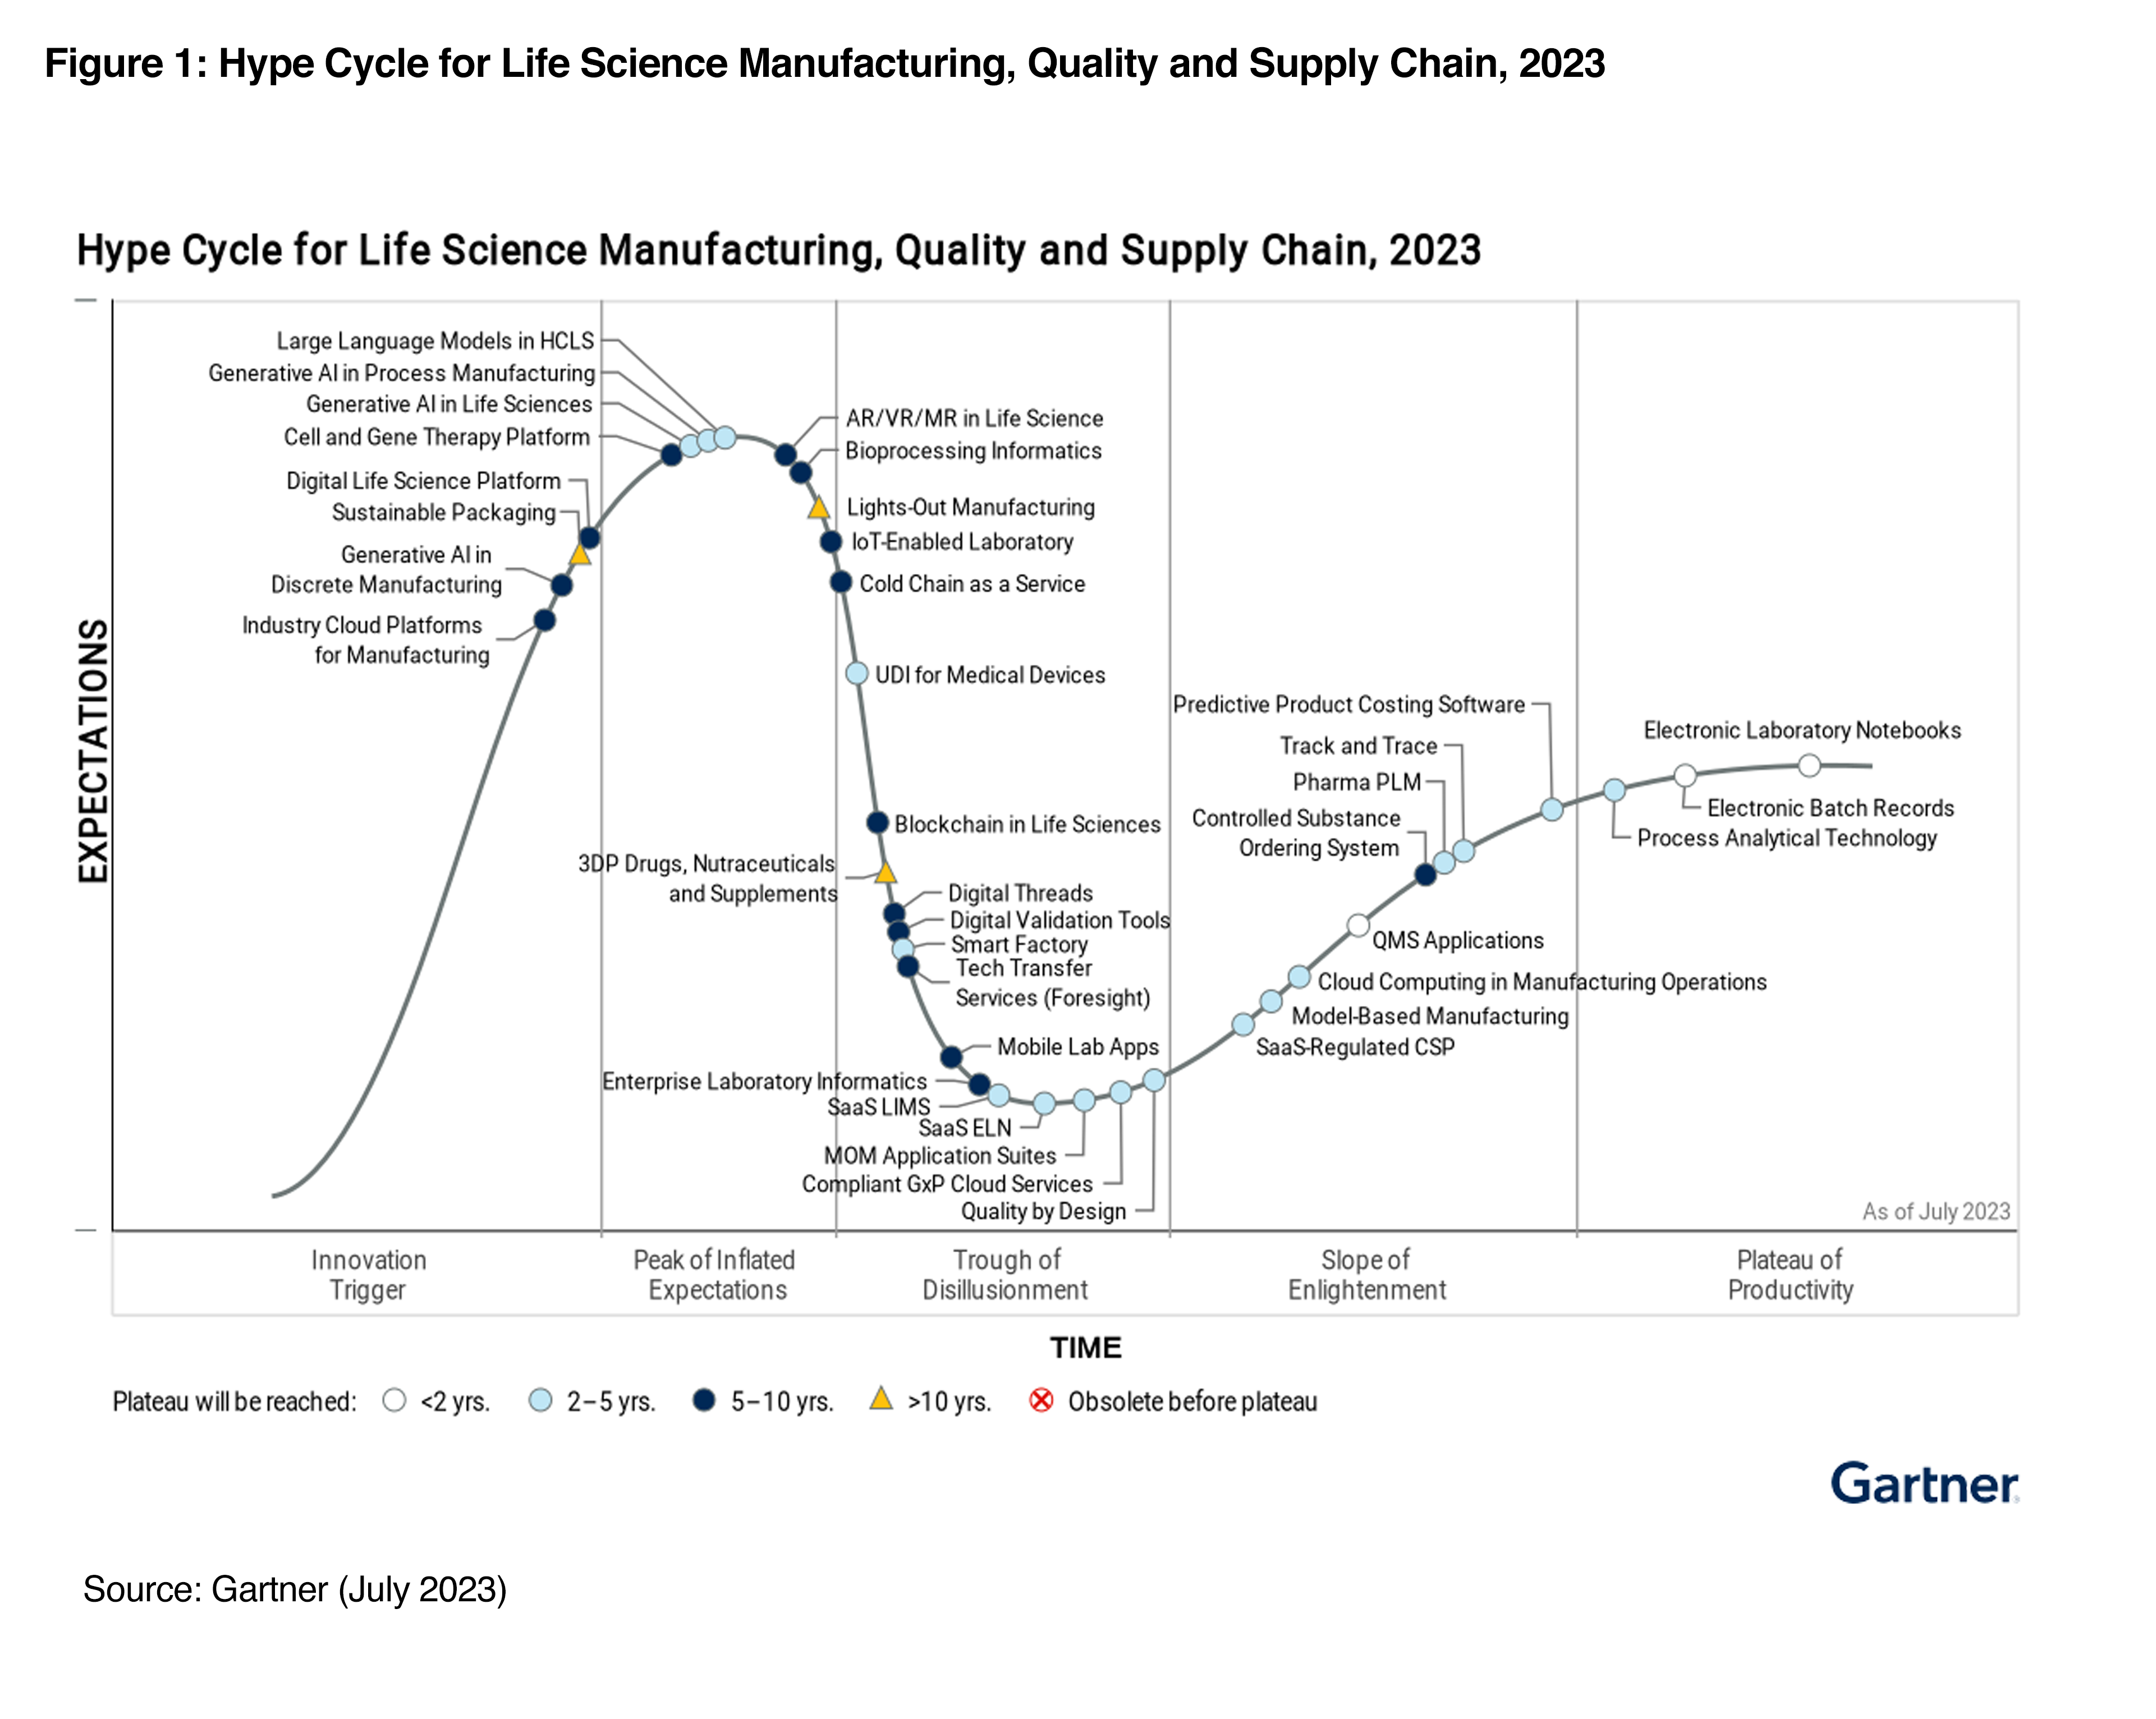 Gartner - Hype Cycle for Life Science Manufacturing, Quality and Supply Chain, 2023